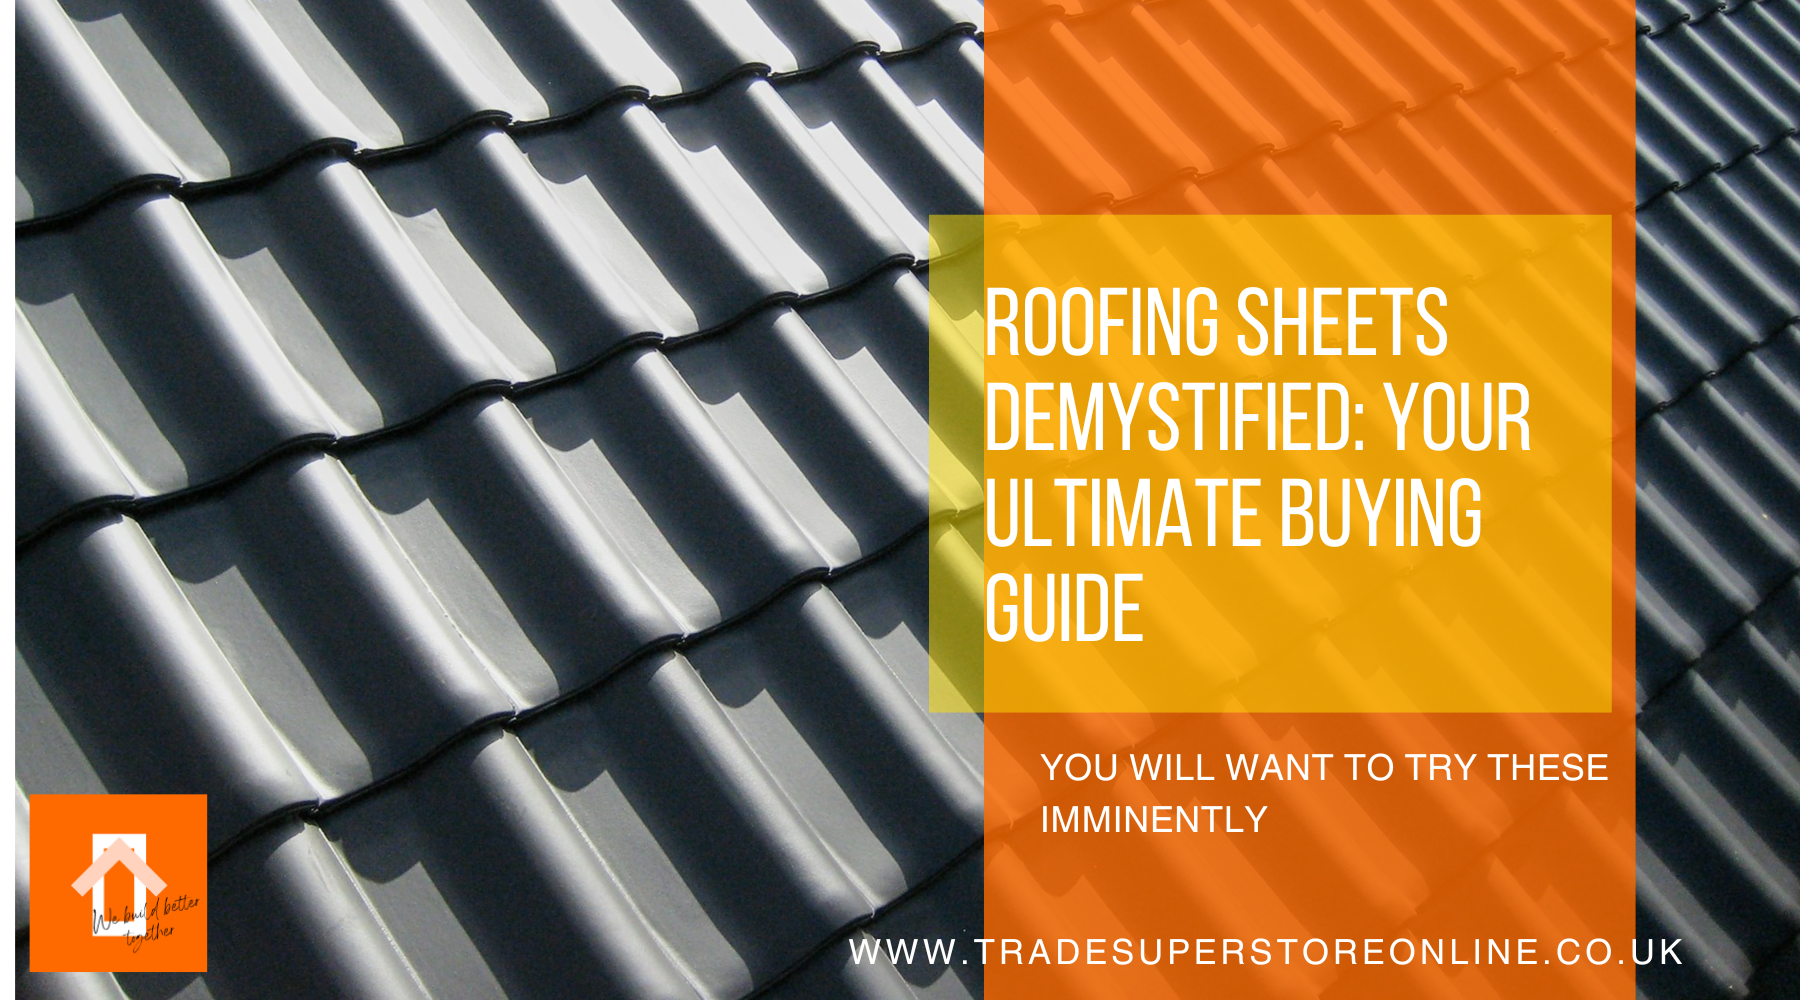 Roofing Sheets Demystified: Your Ultimate Buying Guide